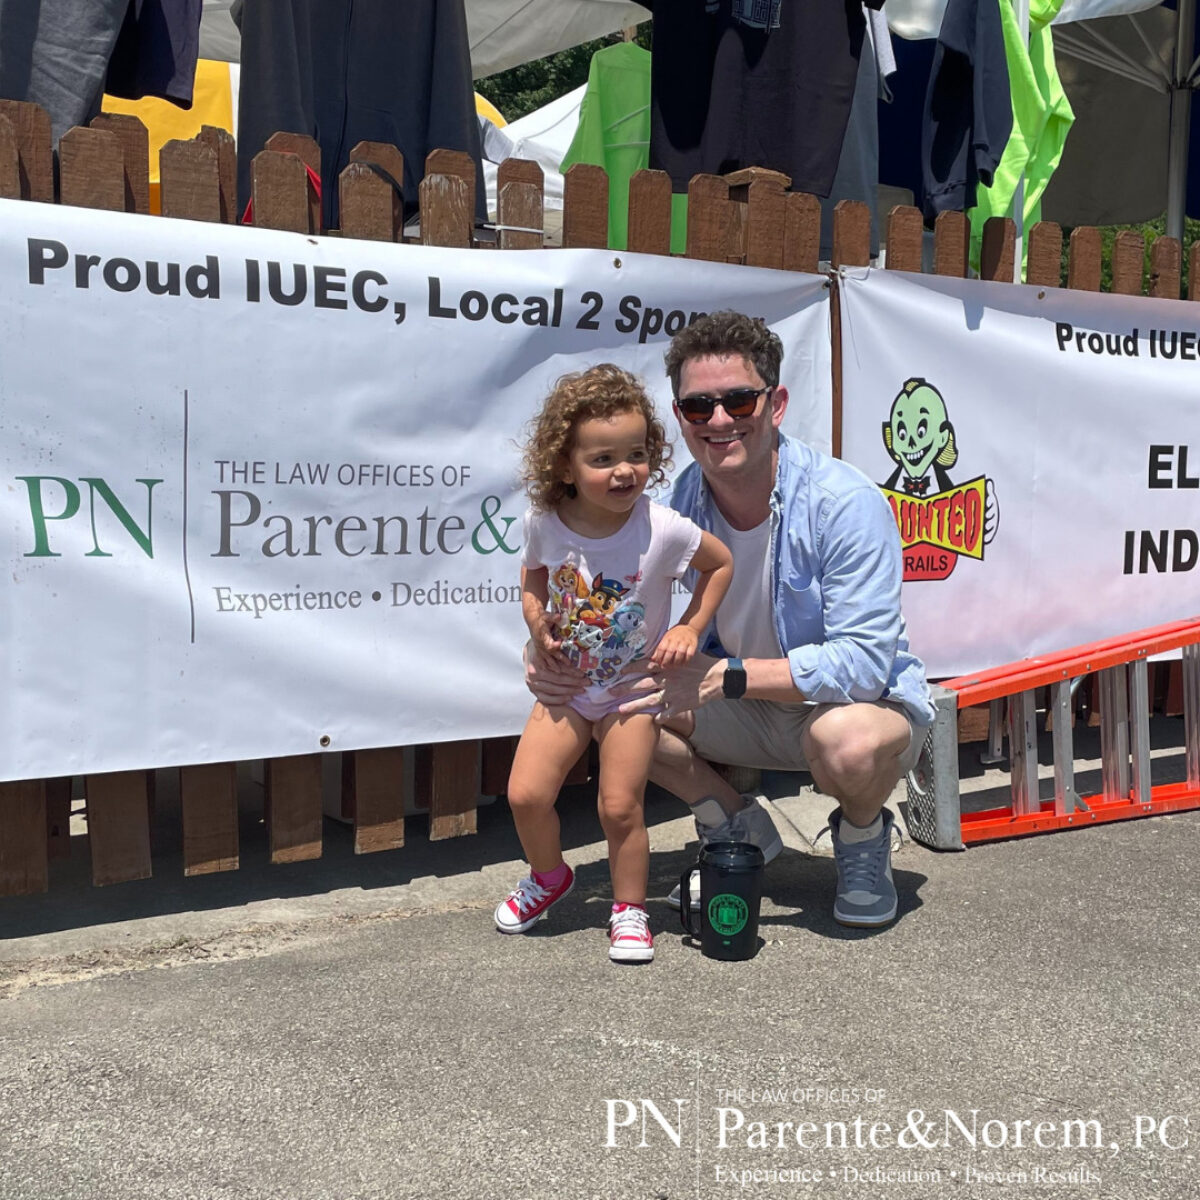 P&N BLOG | The Law Offices of Parente & Norem, P.C. Supports International Union of Elevator Constructors Local 2 Event